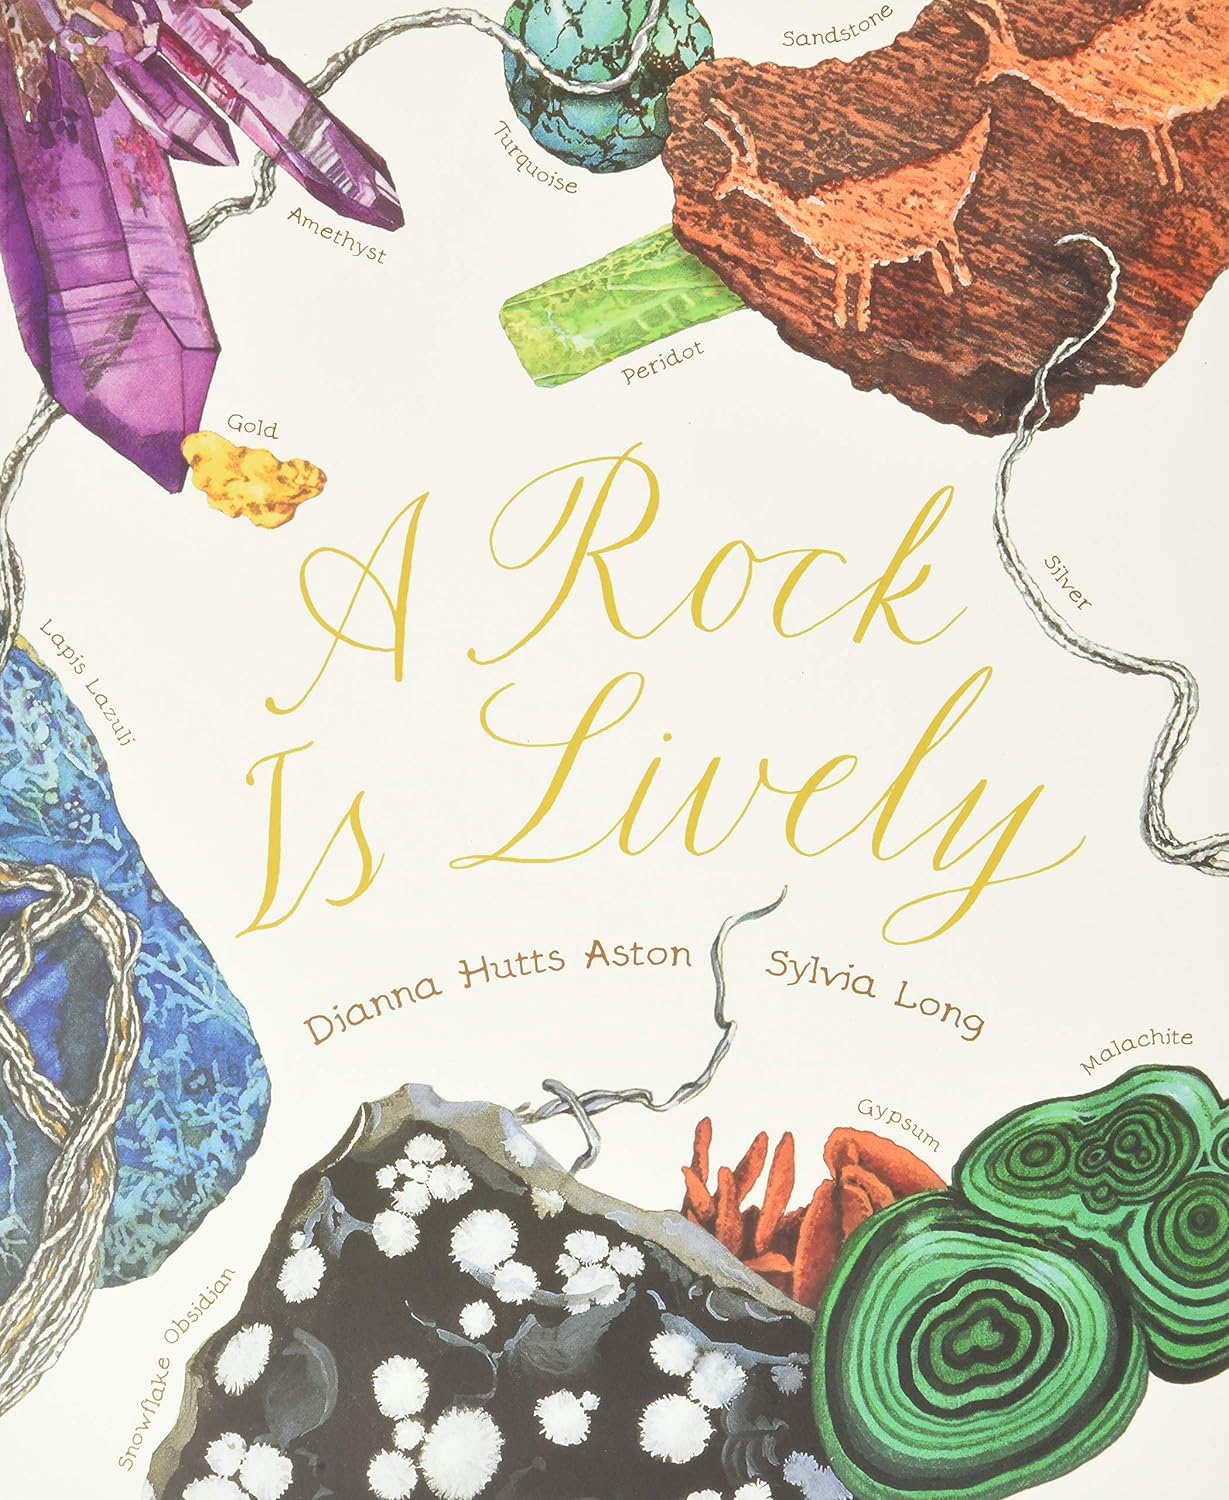 A gorgeous and informative introduction to the fascinating world of rocks. From dazzling blue Lapis Lazuli to volcanic Snowflake Obsidian, an incredible variety of rocks are showcased in all their splendor. Poetic in voice and elegant in design, this book introduces an array of facts.